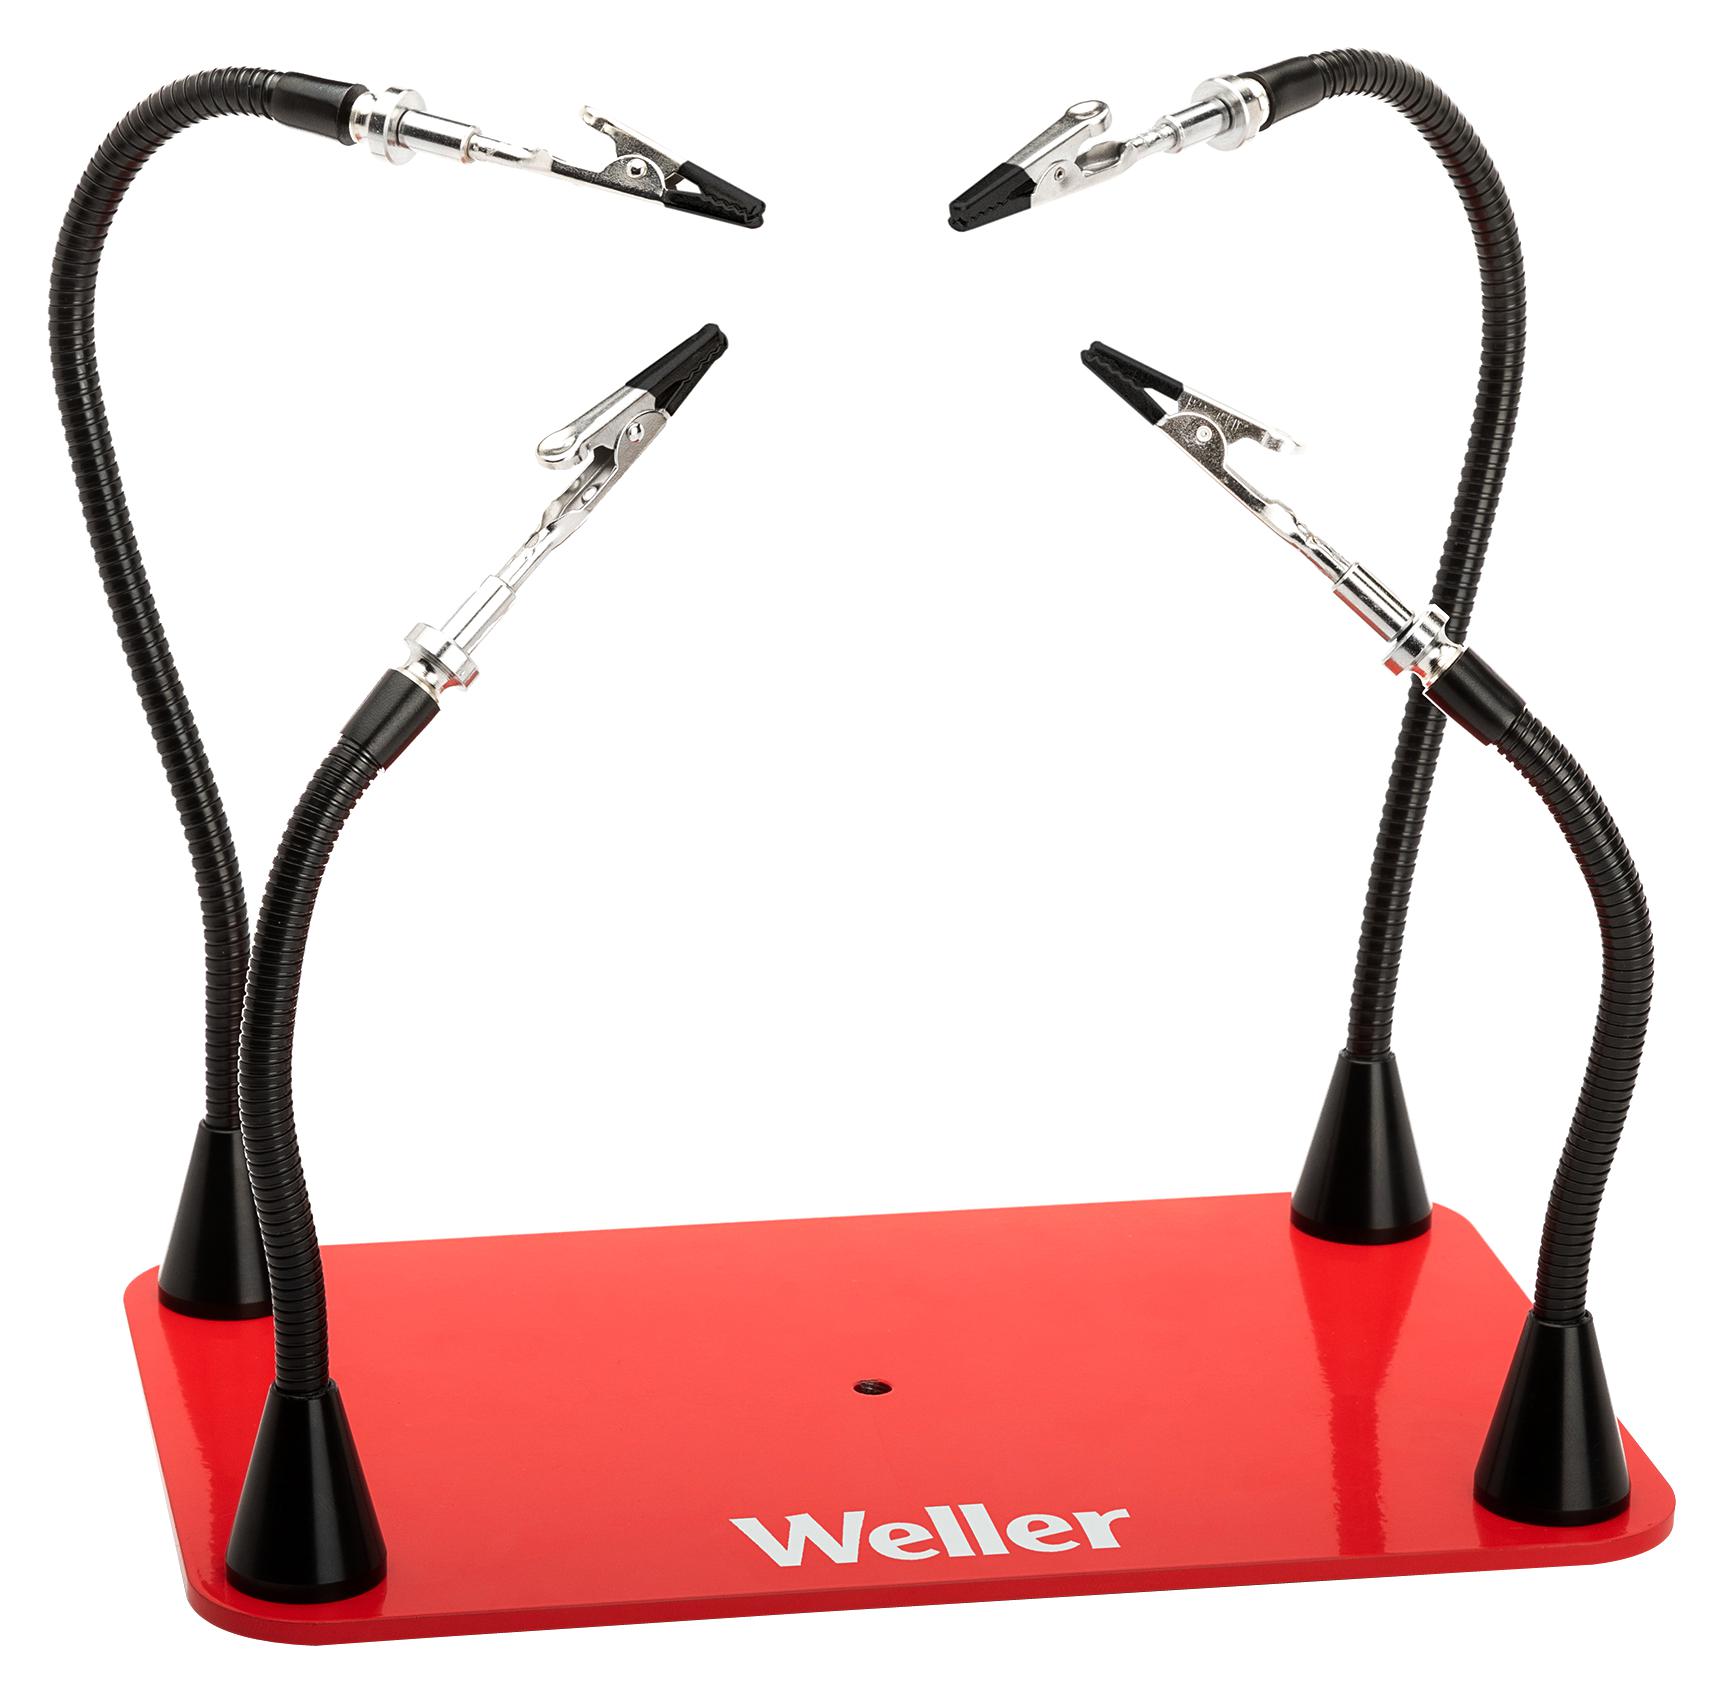 Weller Wlacchhm-02 Helping Hand W/magnetic ARM